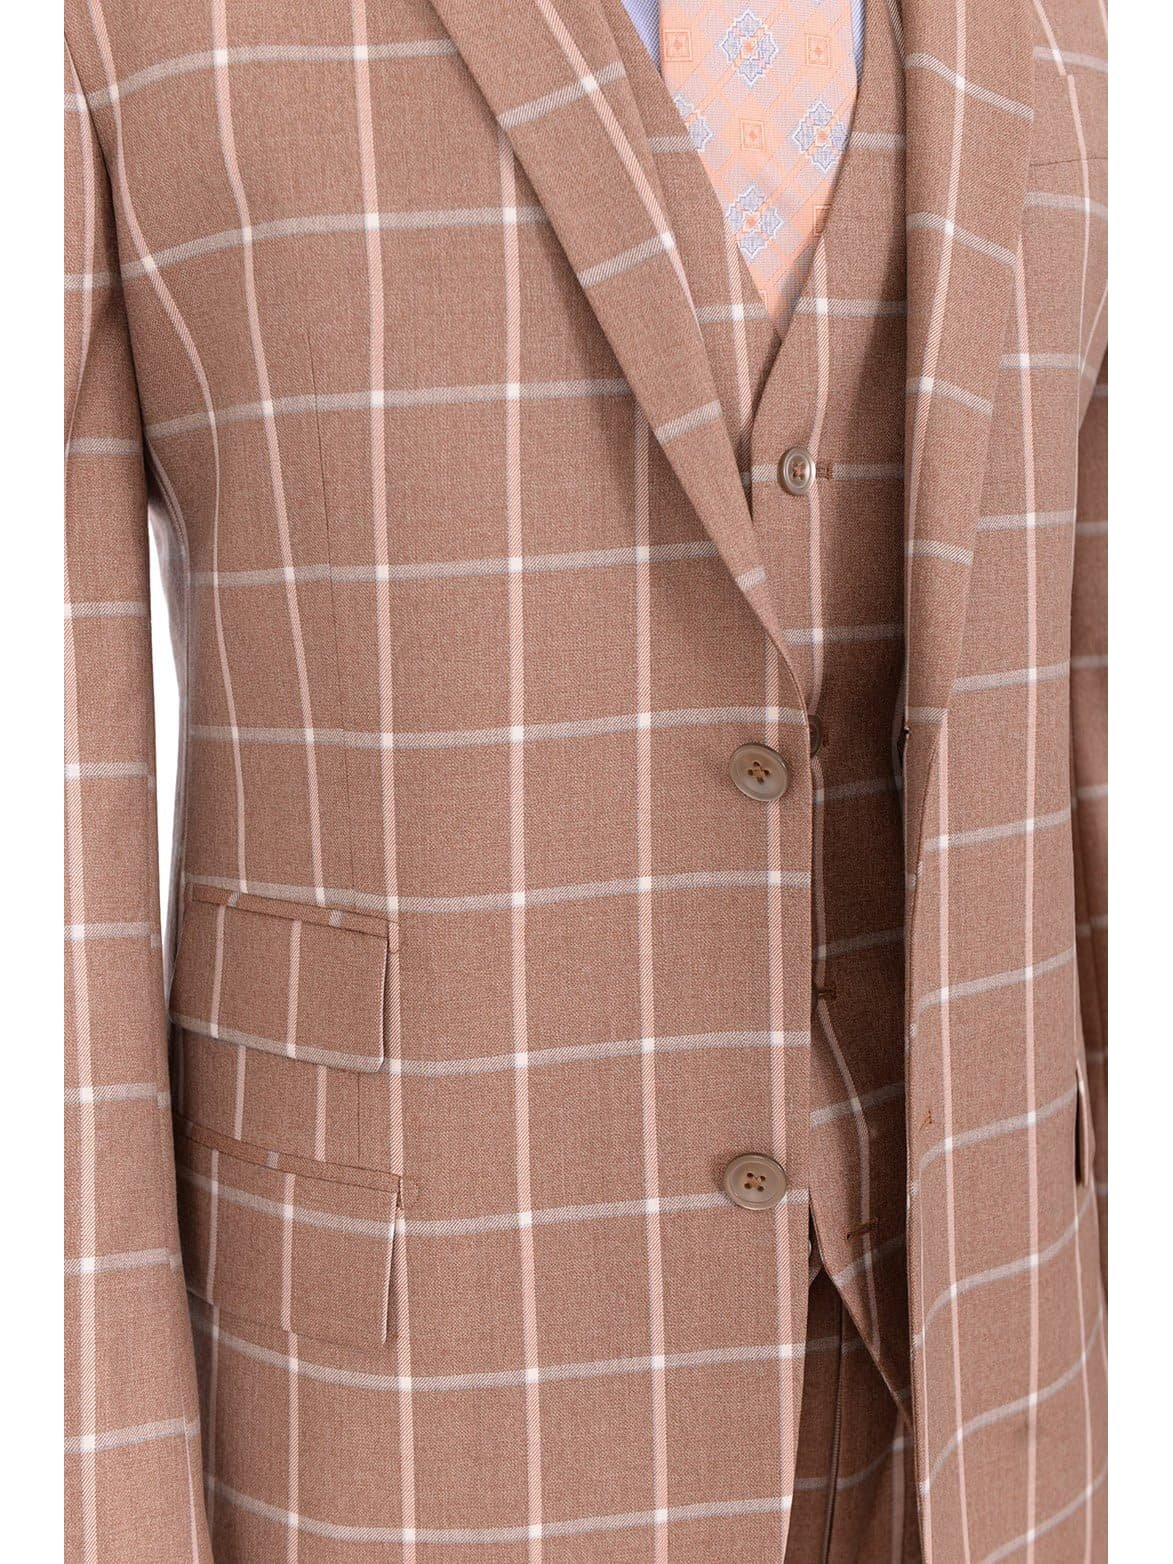 Steven Land Sale Suits Steven Land Classic Fit Brown Windowpane Three Piece Pleated Wool Suit